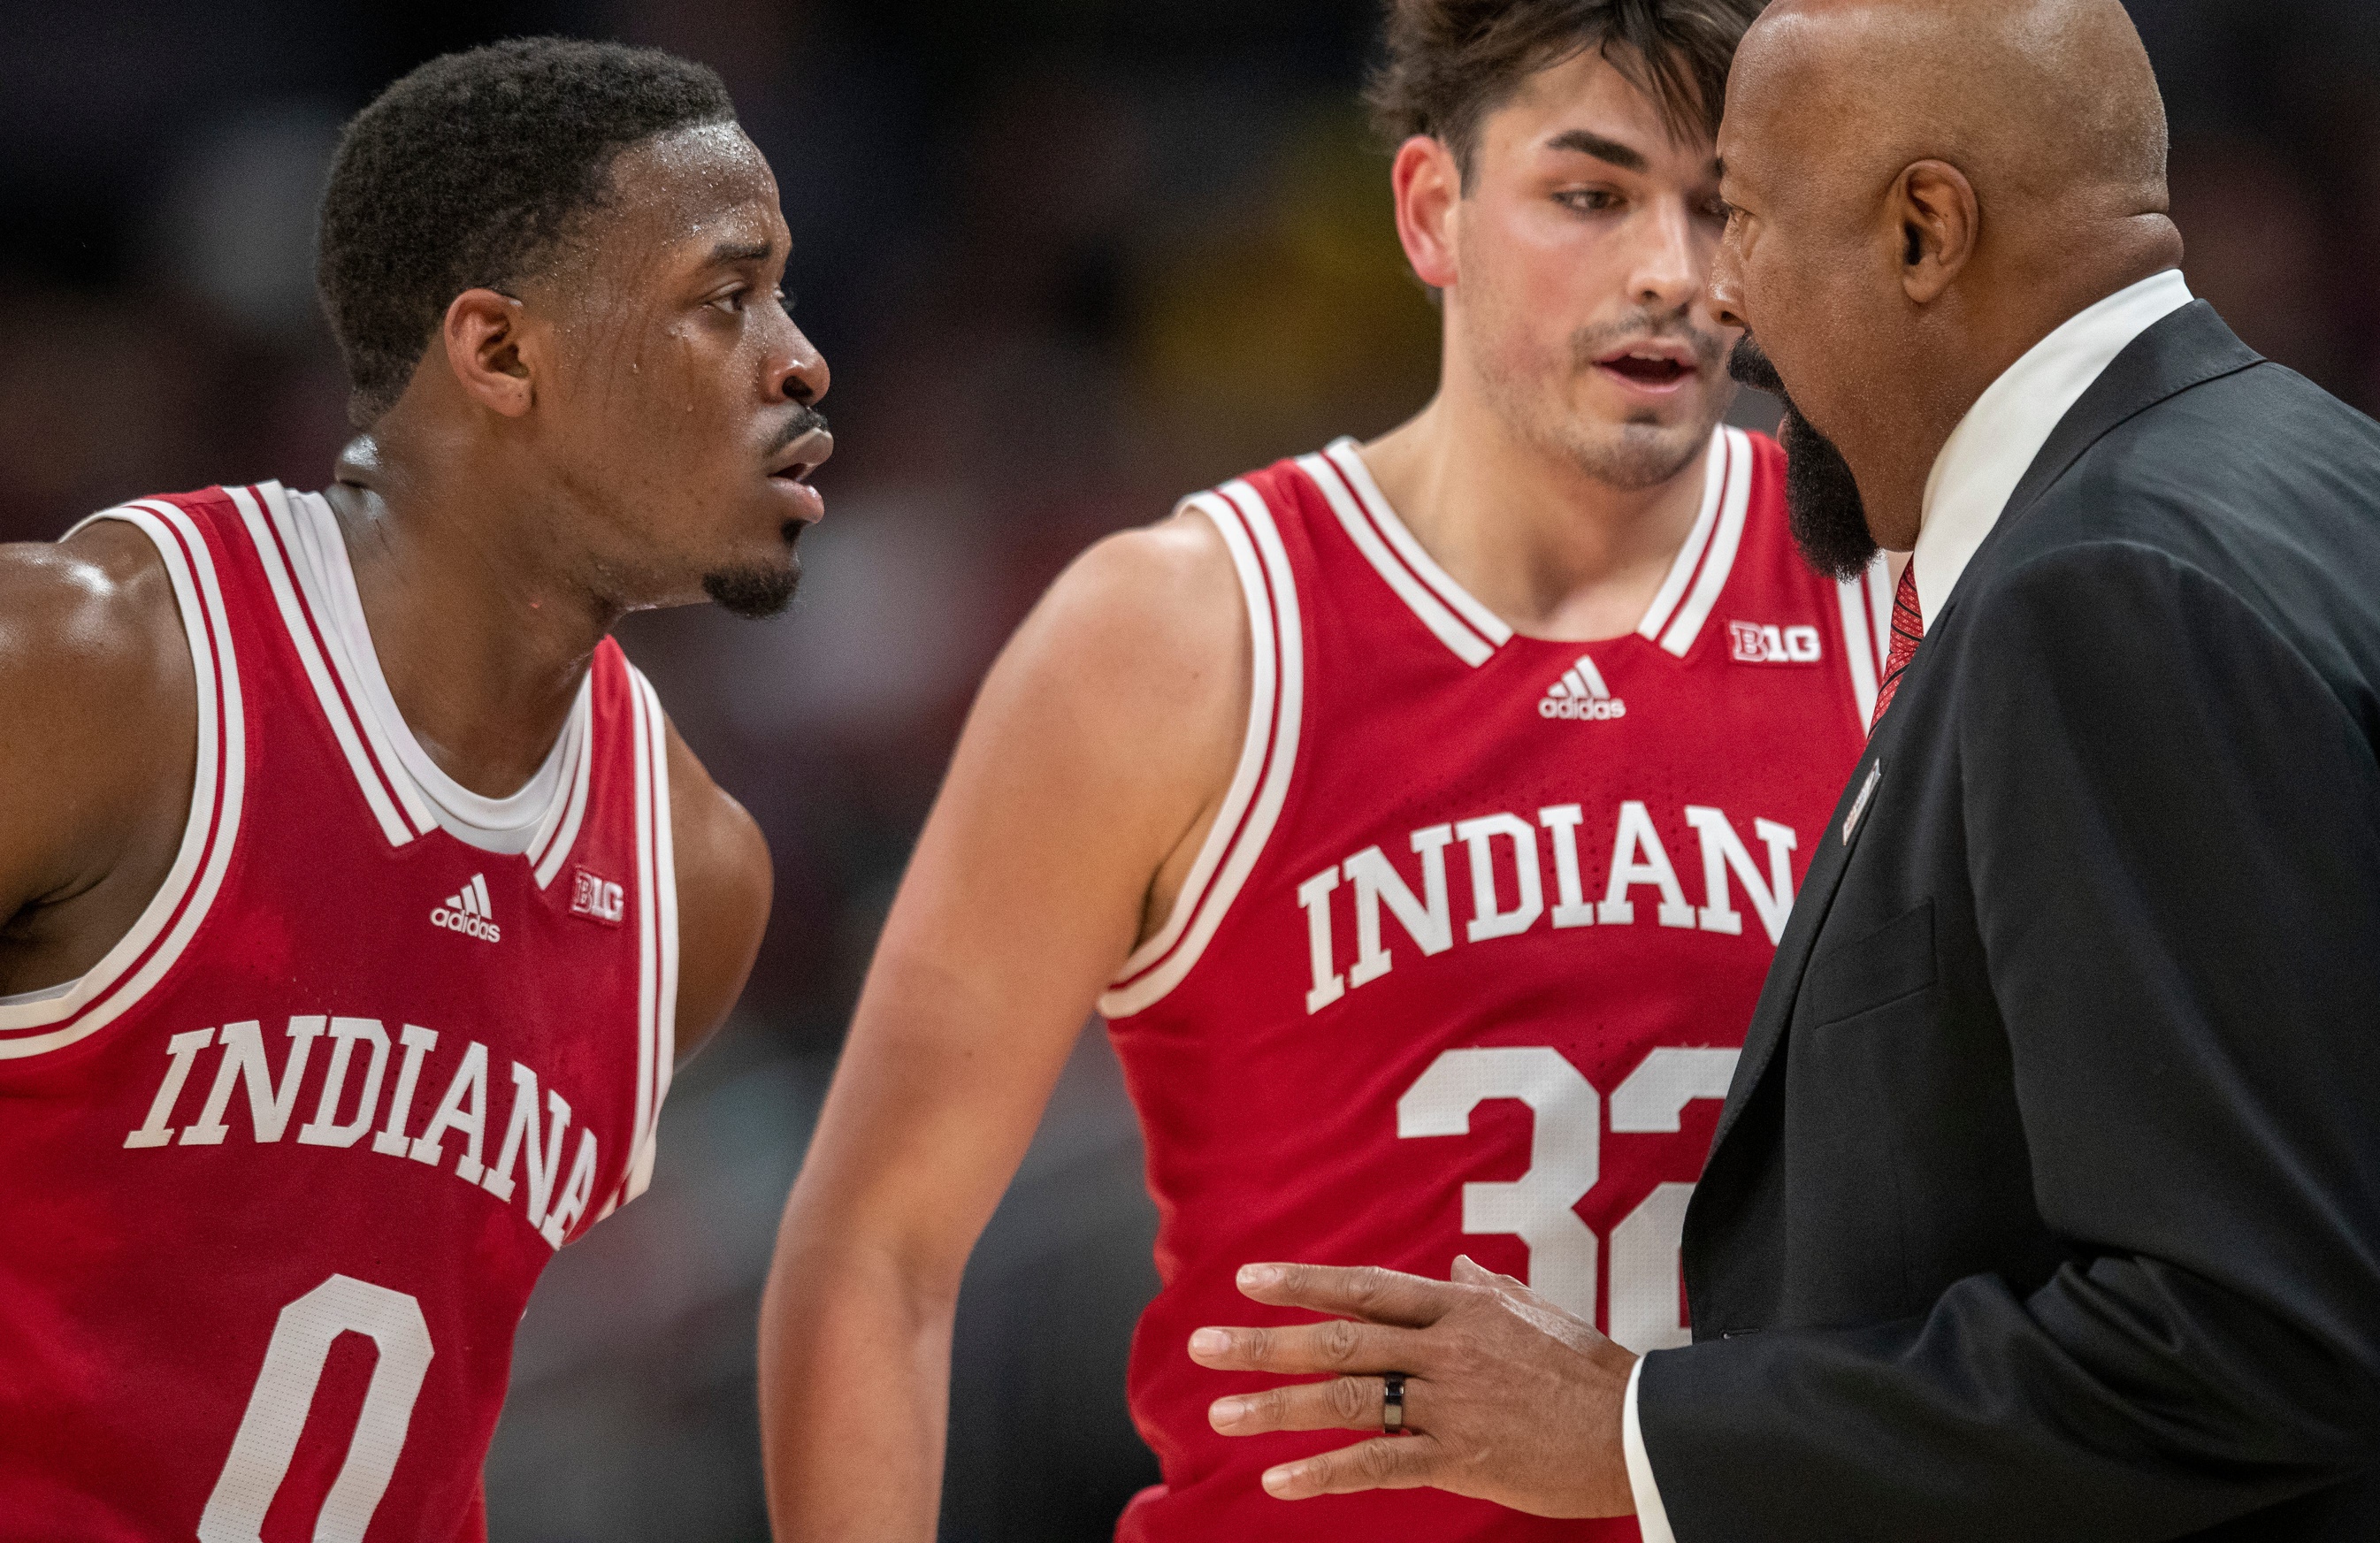 Three Standout Moments From Hoosier Hysteria